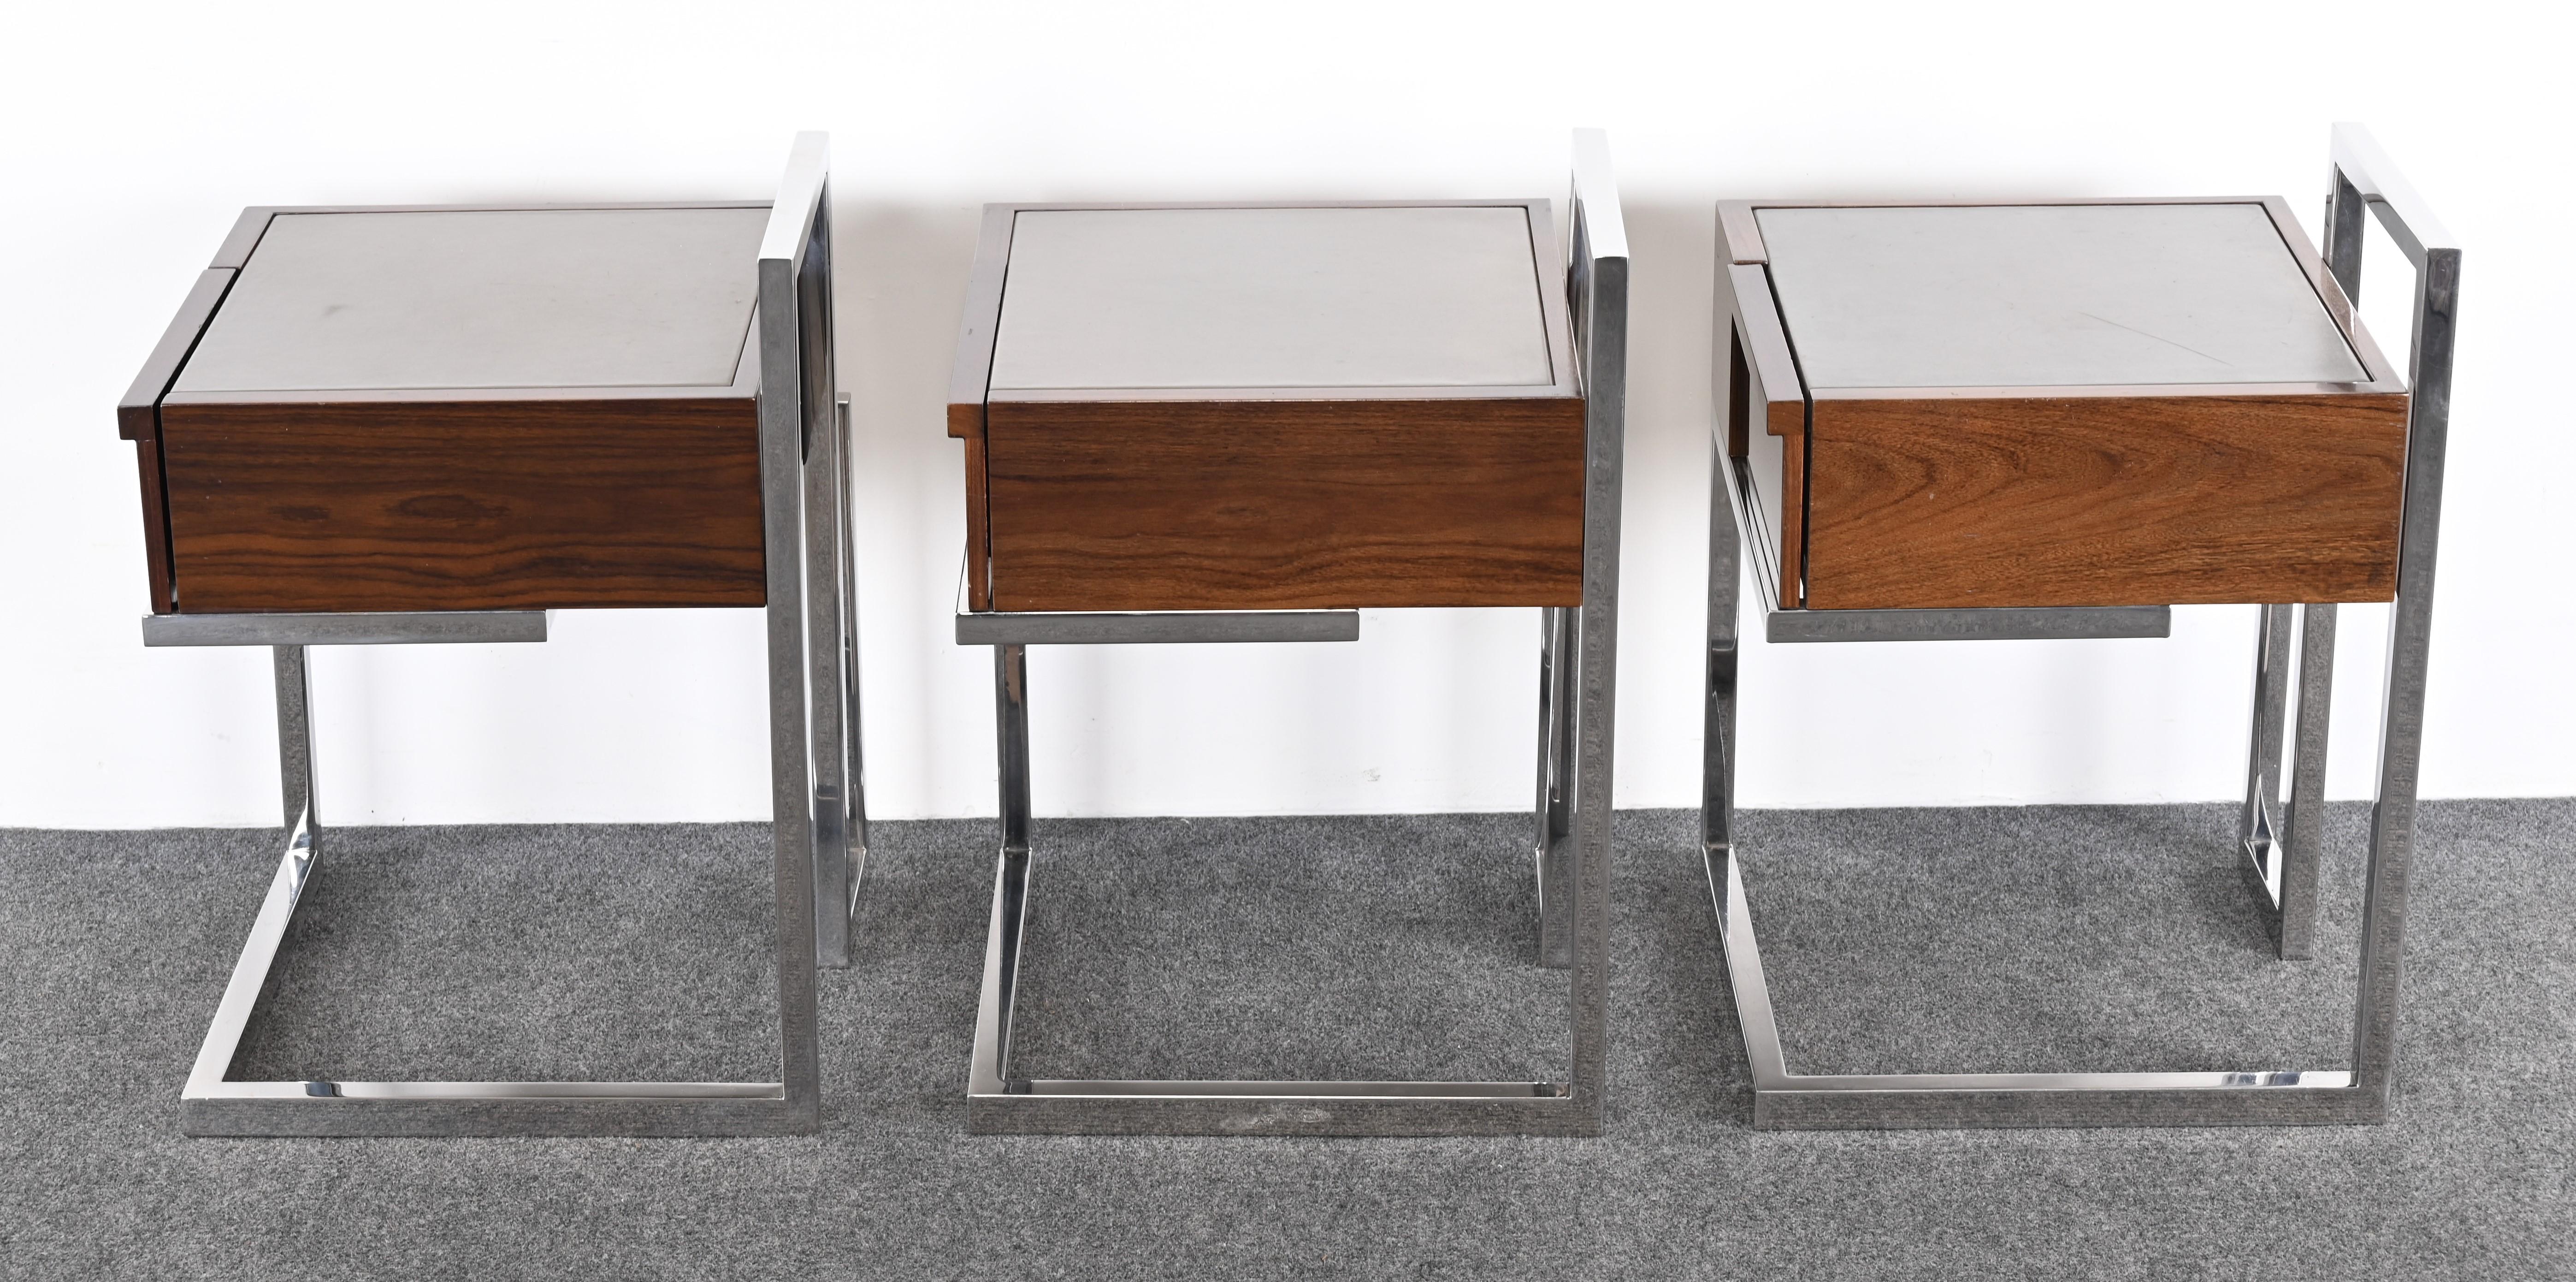 Lacquered Walnut and Stainless Steel End Tables by Vladimir Kagan for Gucci For Sale 7